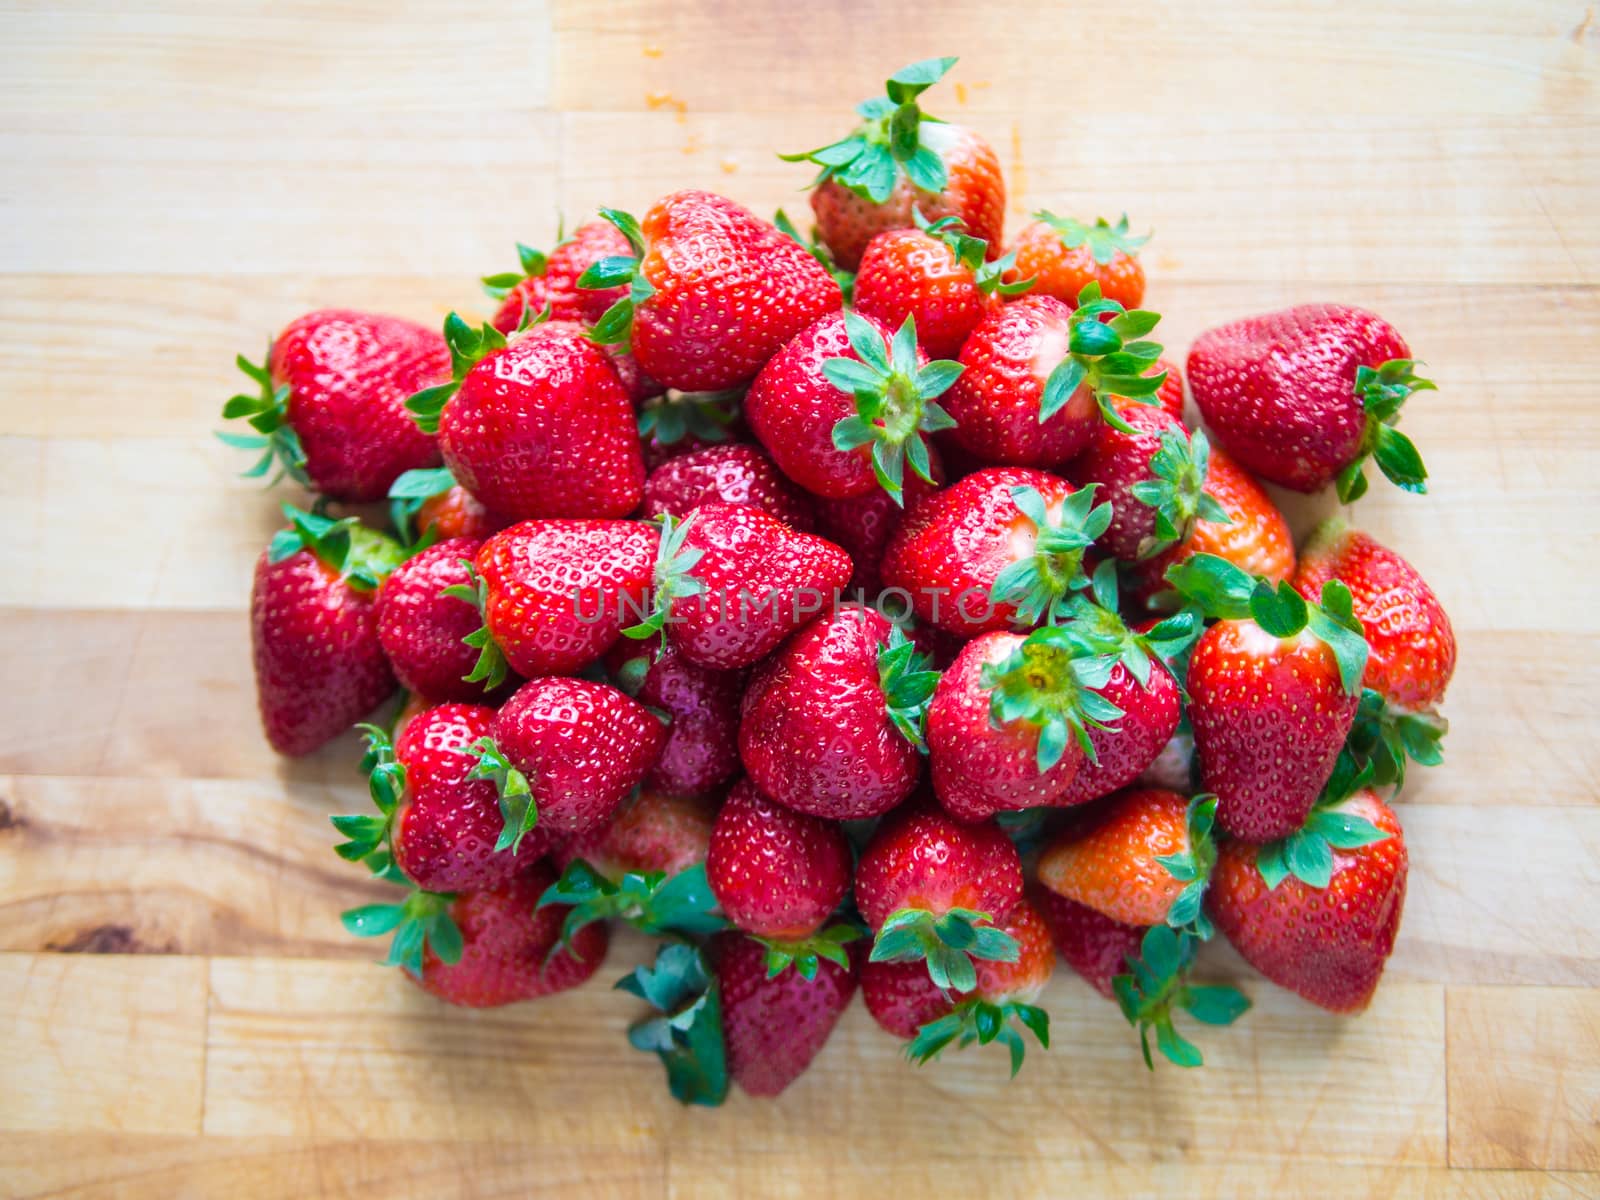 Pile of red fresh strawberries on wooden board